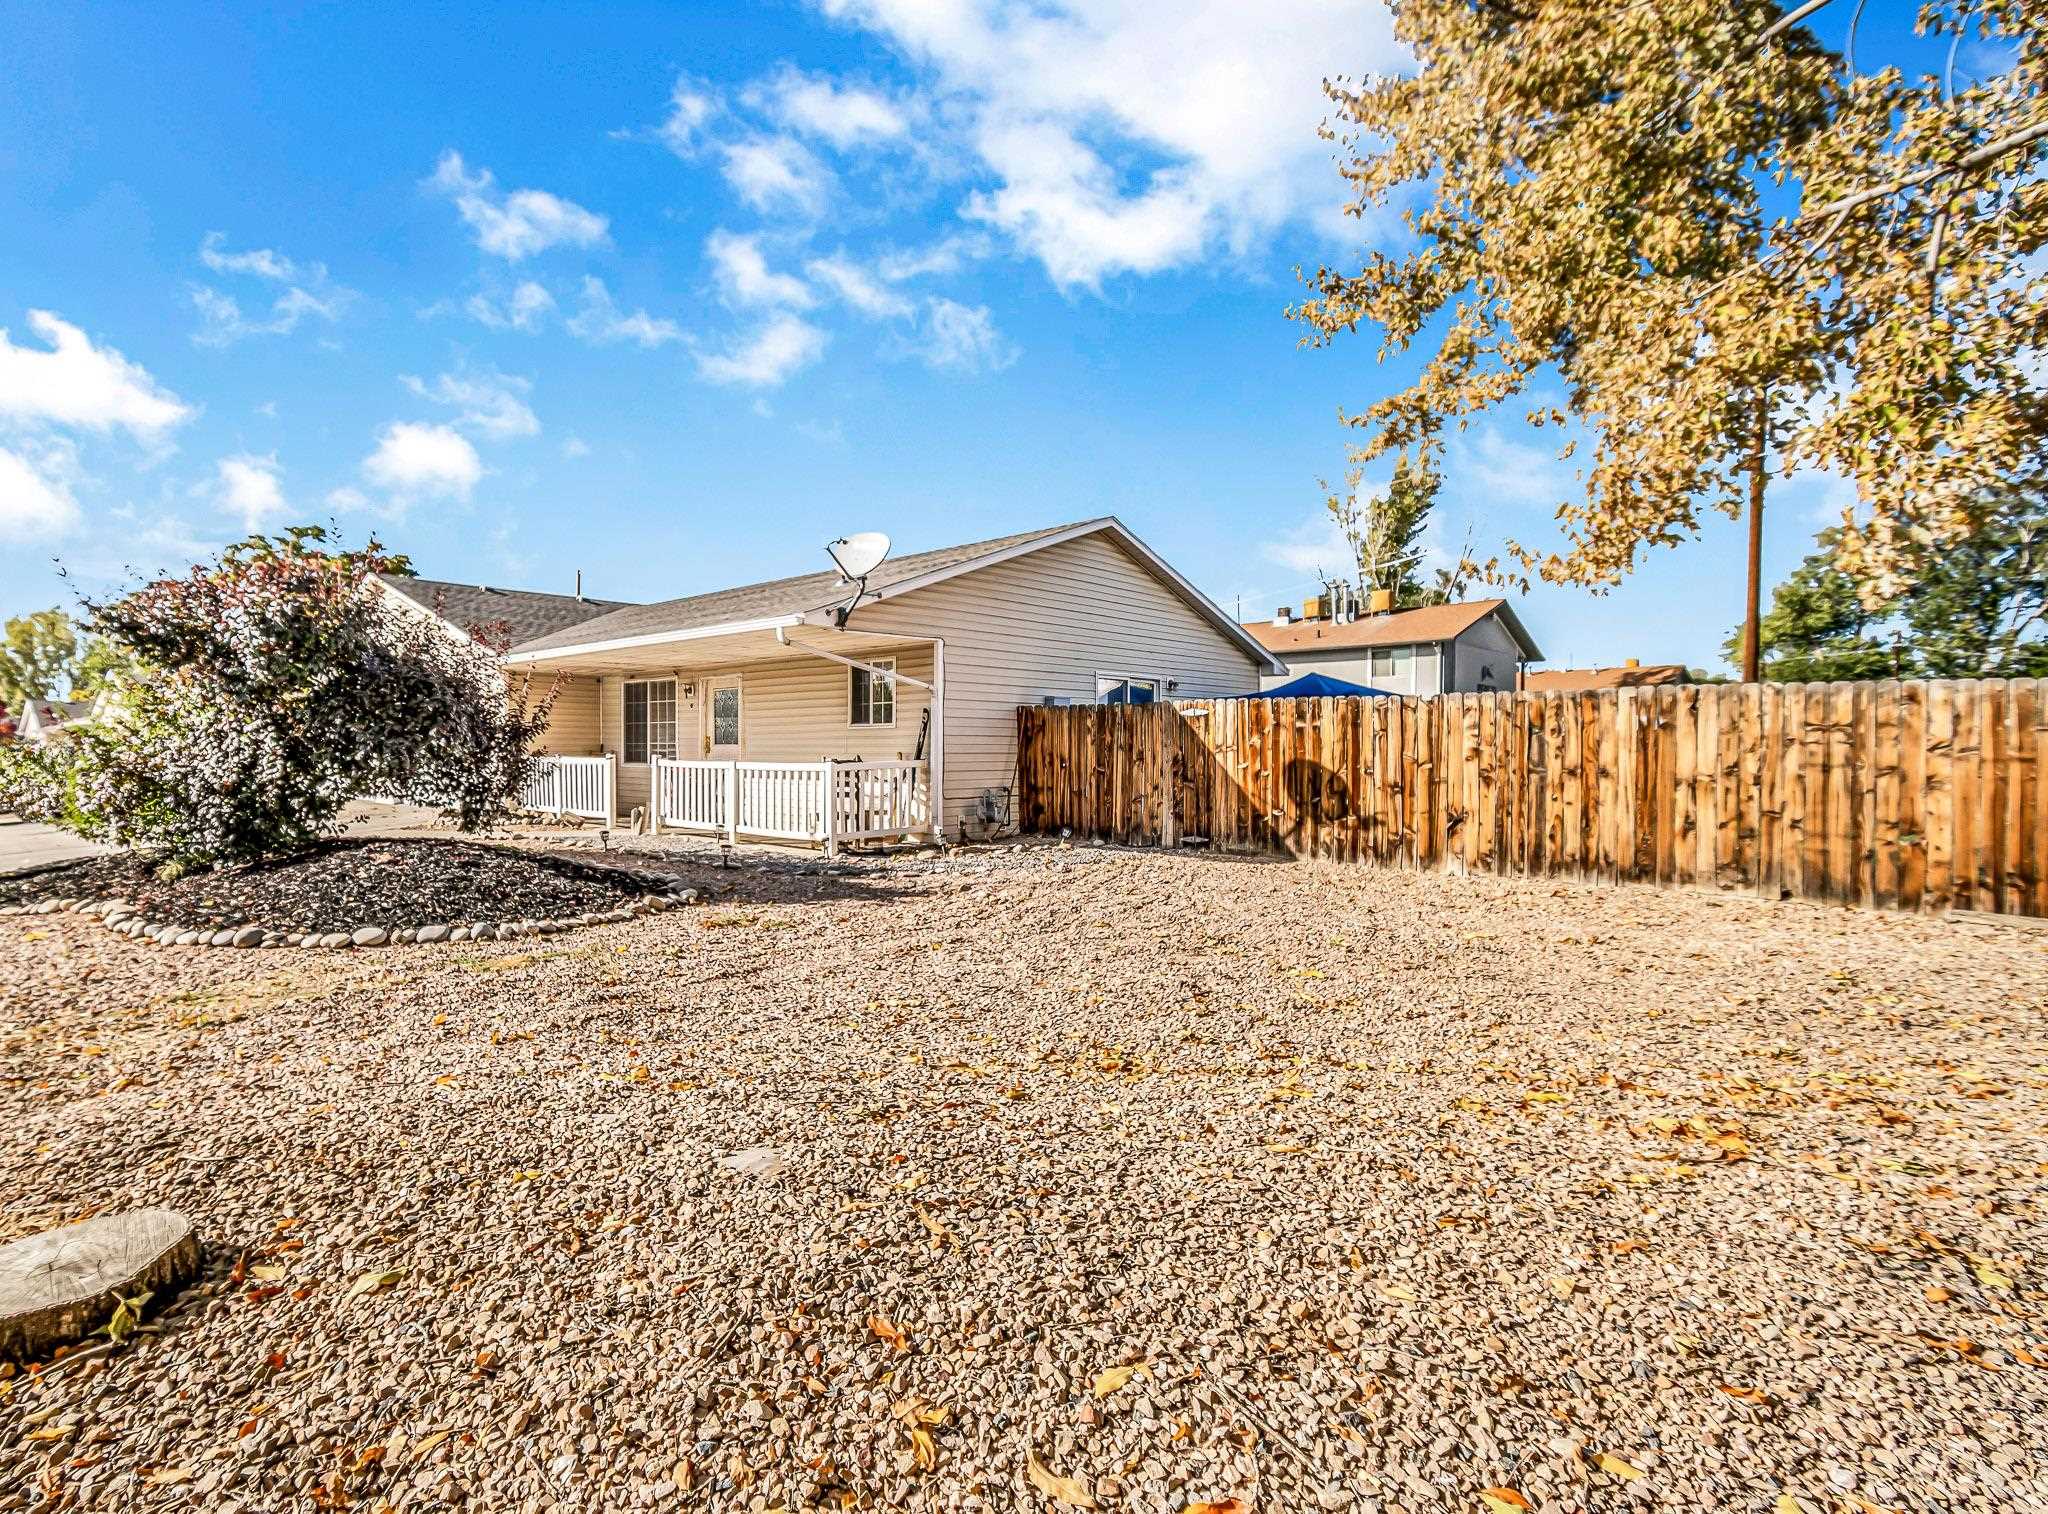 Corner Large Fenced Lot with sprinklers in backyard!!  3 Bedroom and 2 Bath with a  2 Car Garage.  Great place to live.  Lush green irrigated backyard adds to the comfort living with home located on a corner lot and front yard with xeriscape.